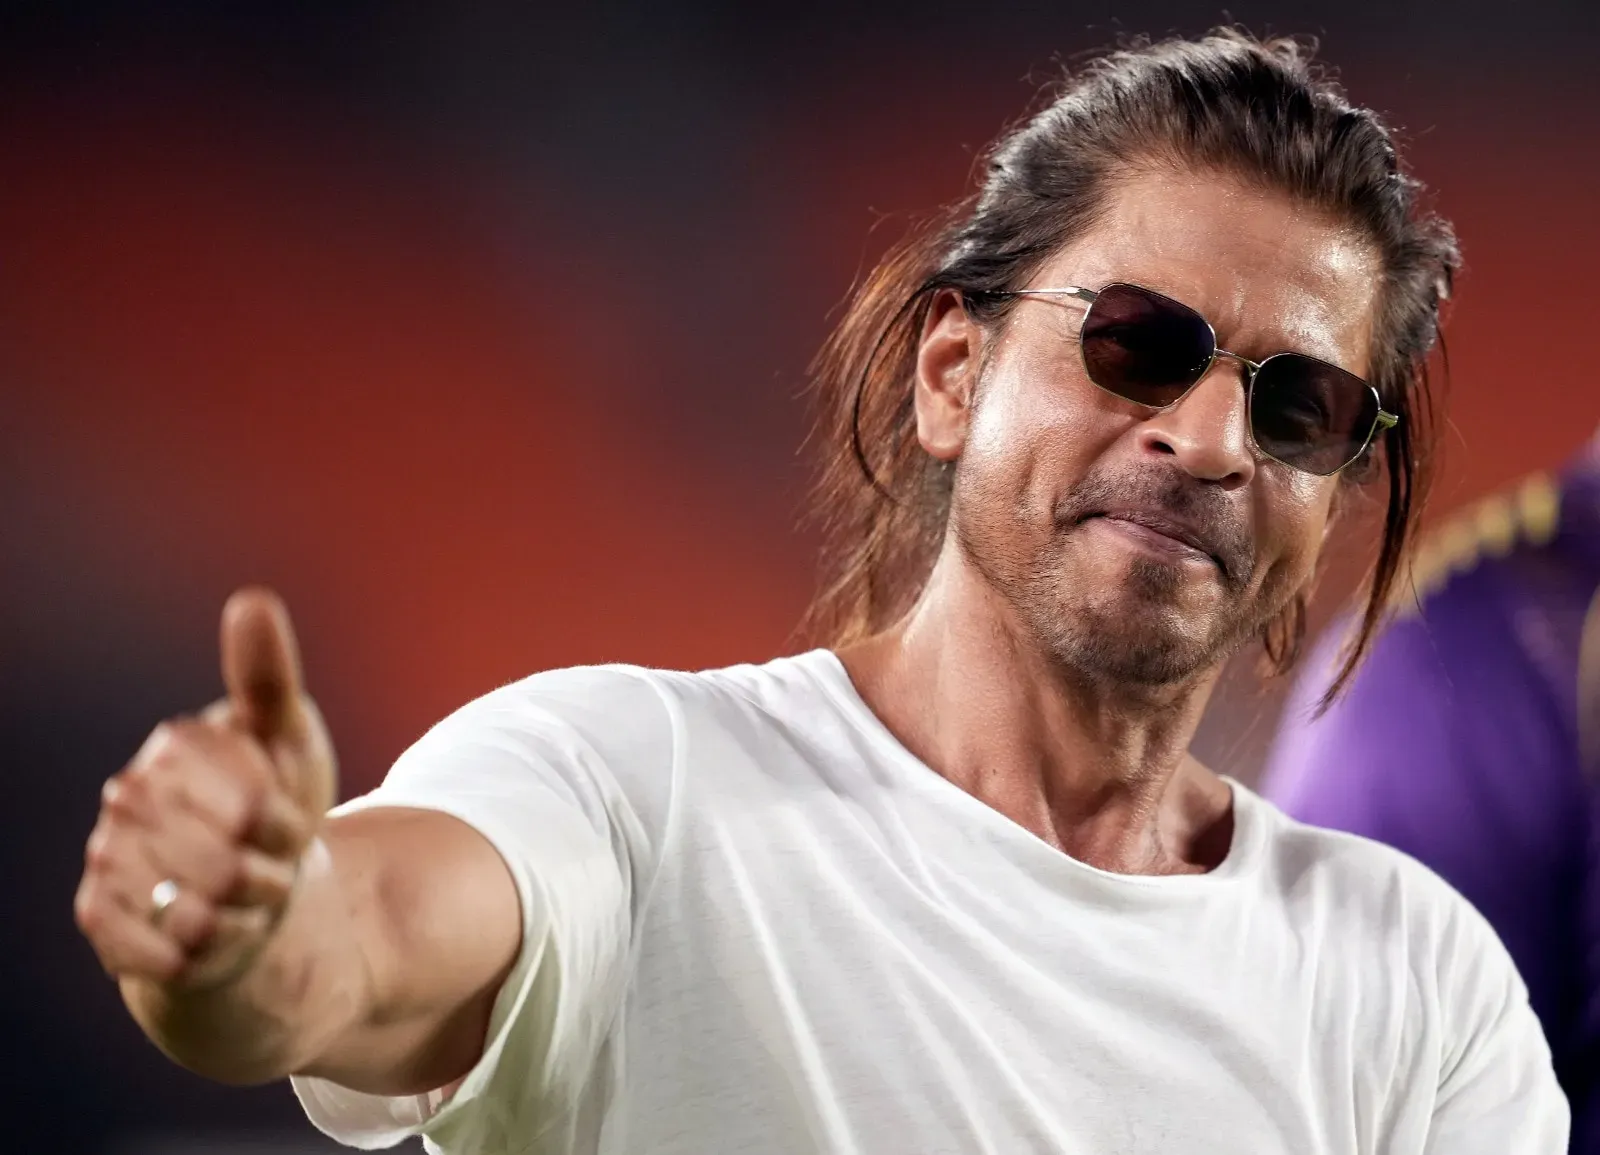 Shah Rukh Khan was overjoyed when KKR reached the IPL final, his reaction stole the show